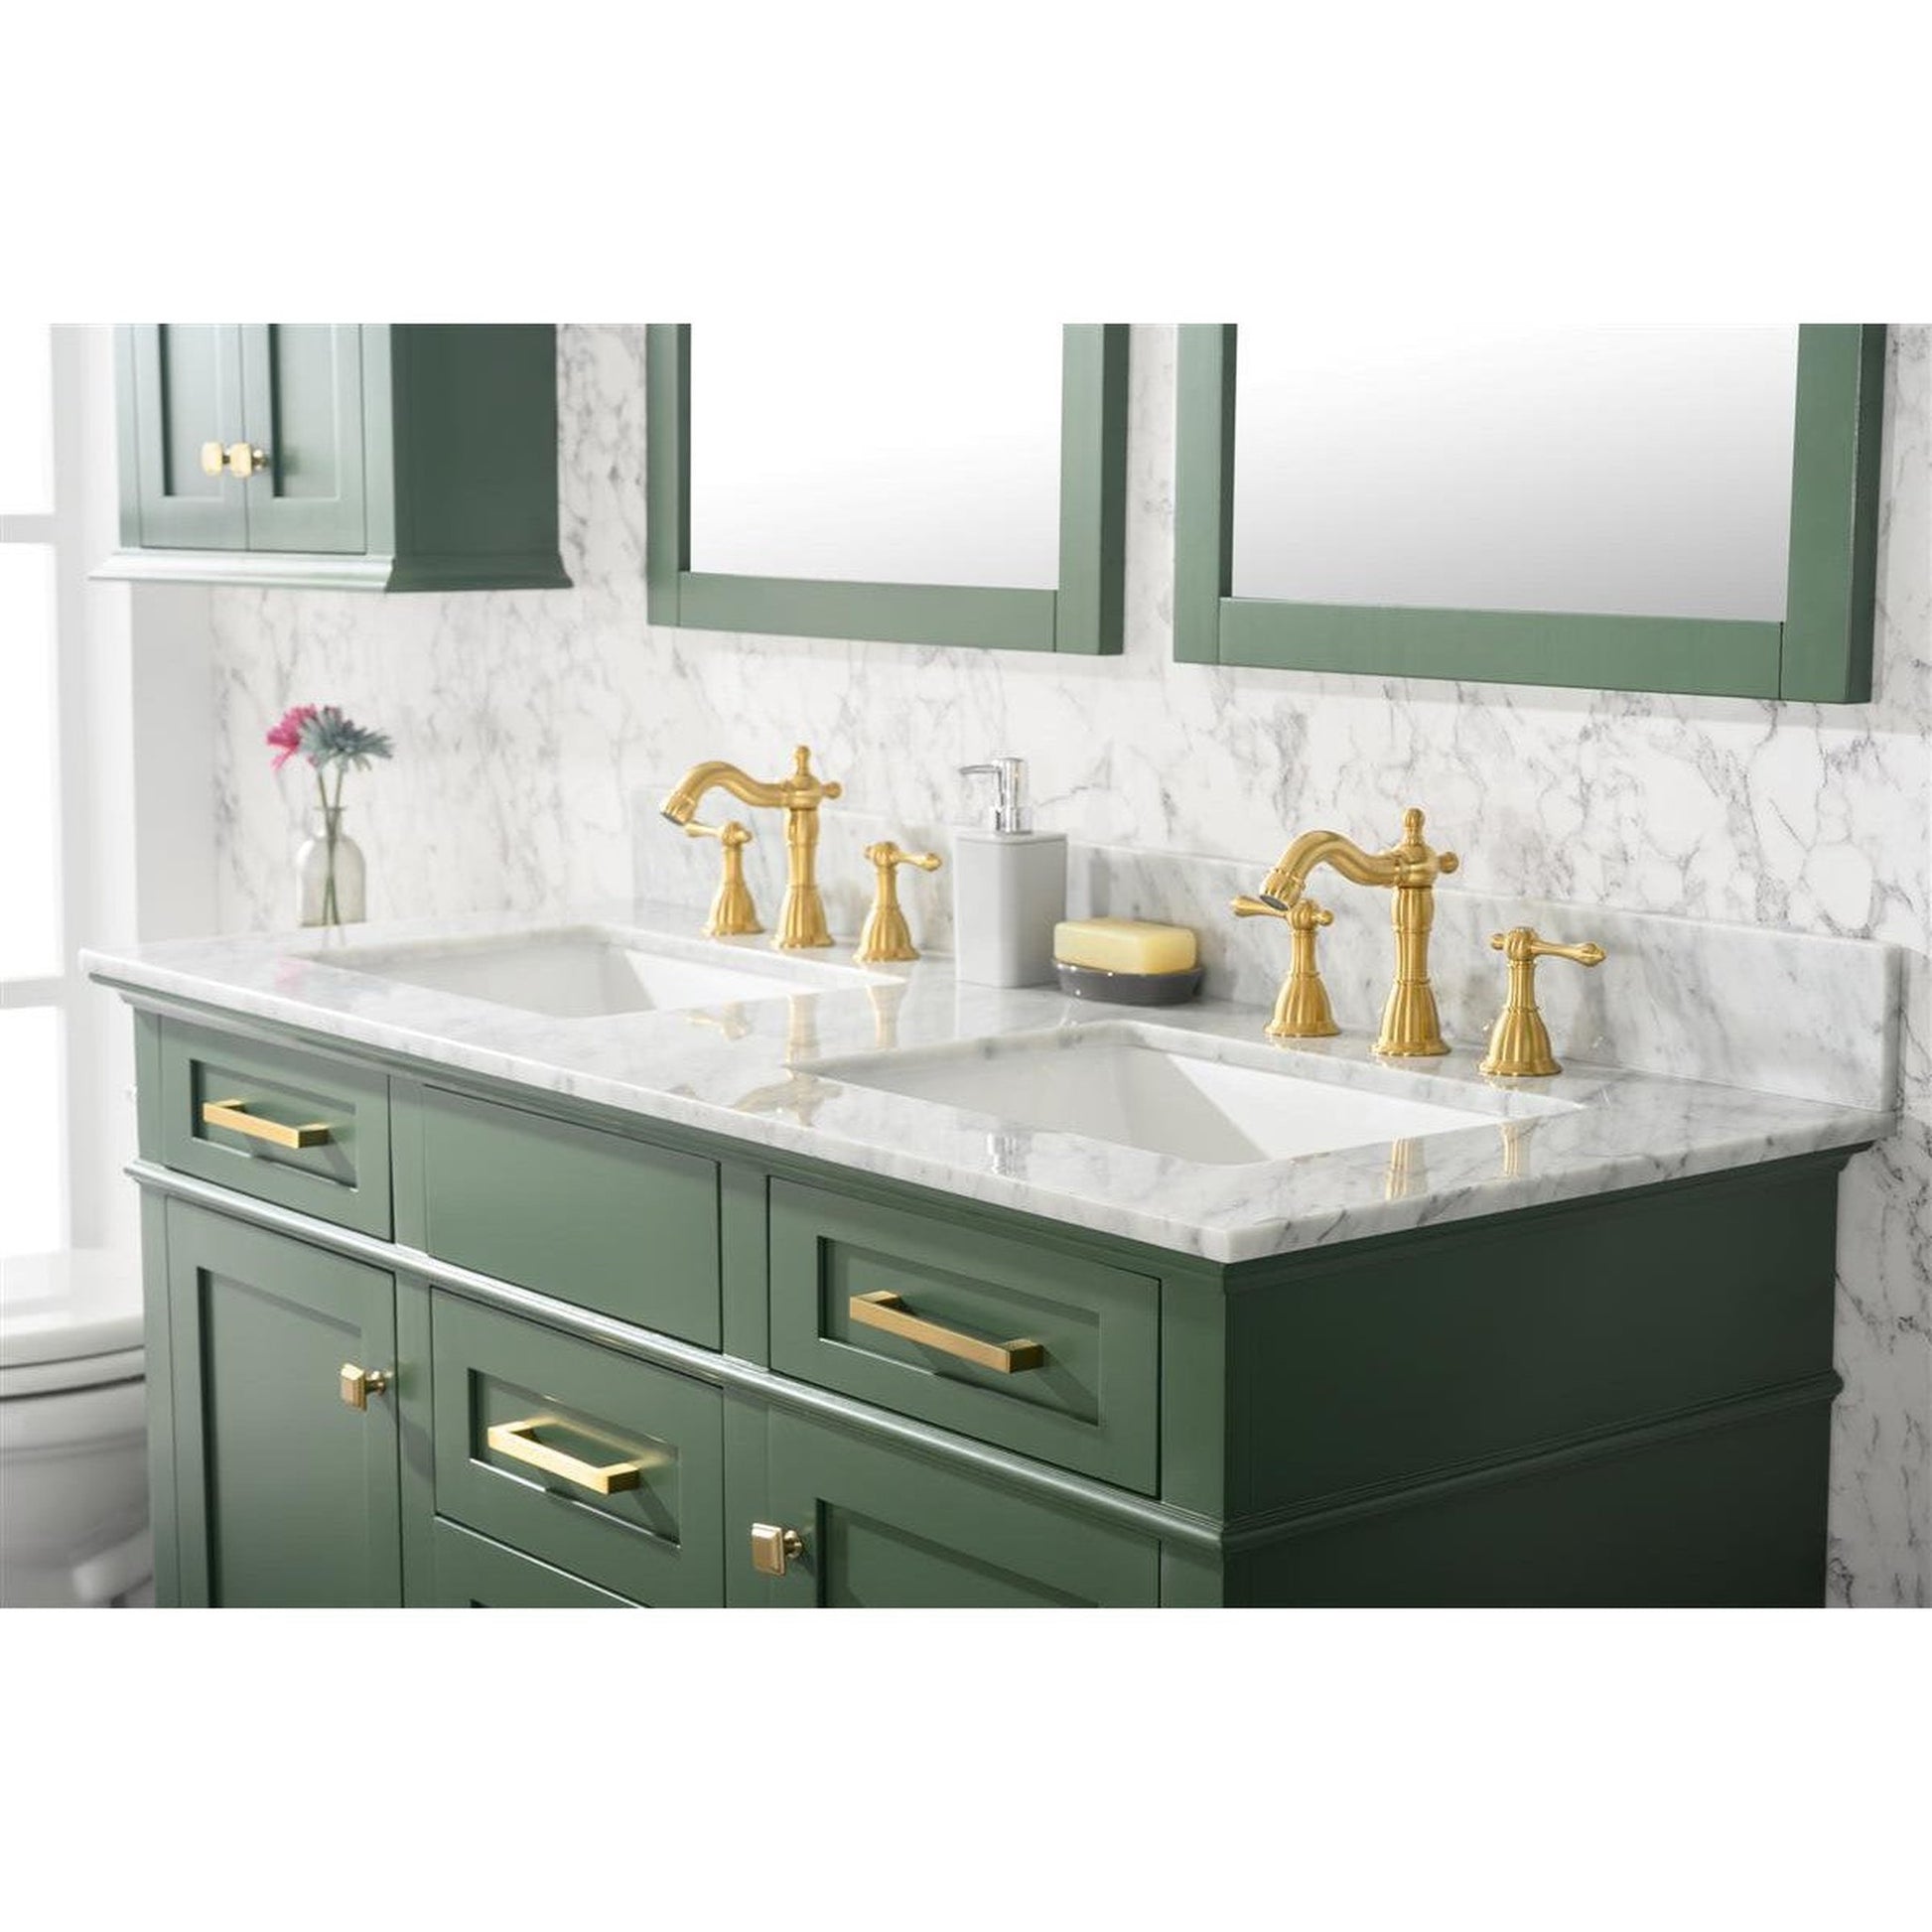 Legion Furniture WLF2254 54" Vogue Green Freestanding Vanity With White Carrara Marble Top and Double White Ceramic Sink